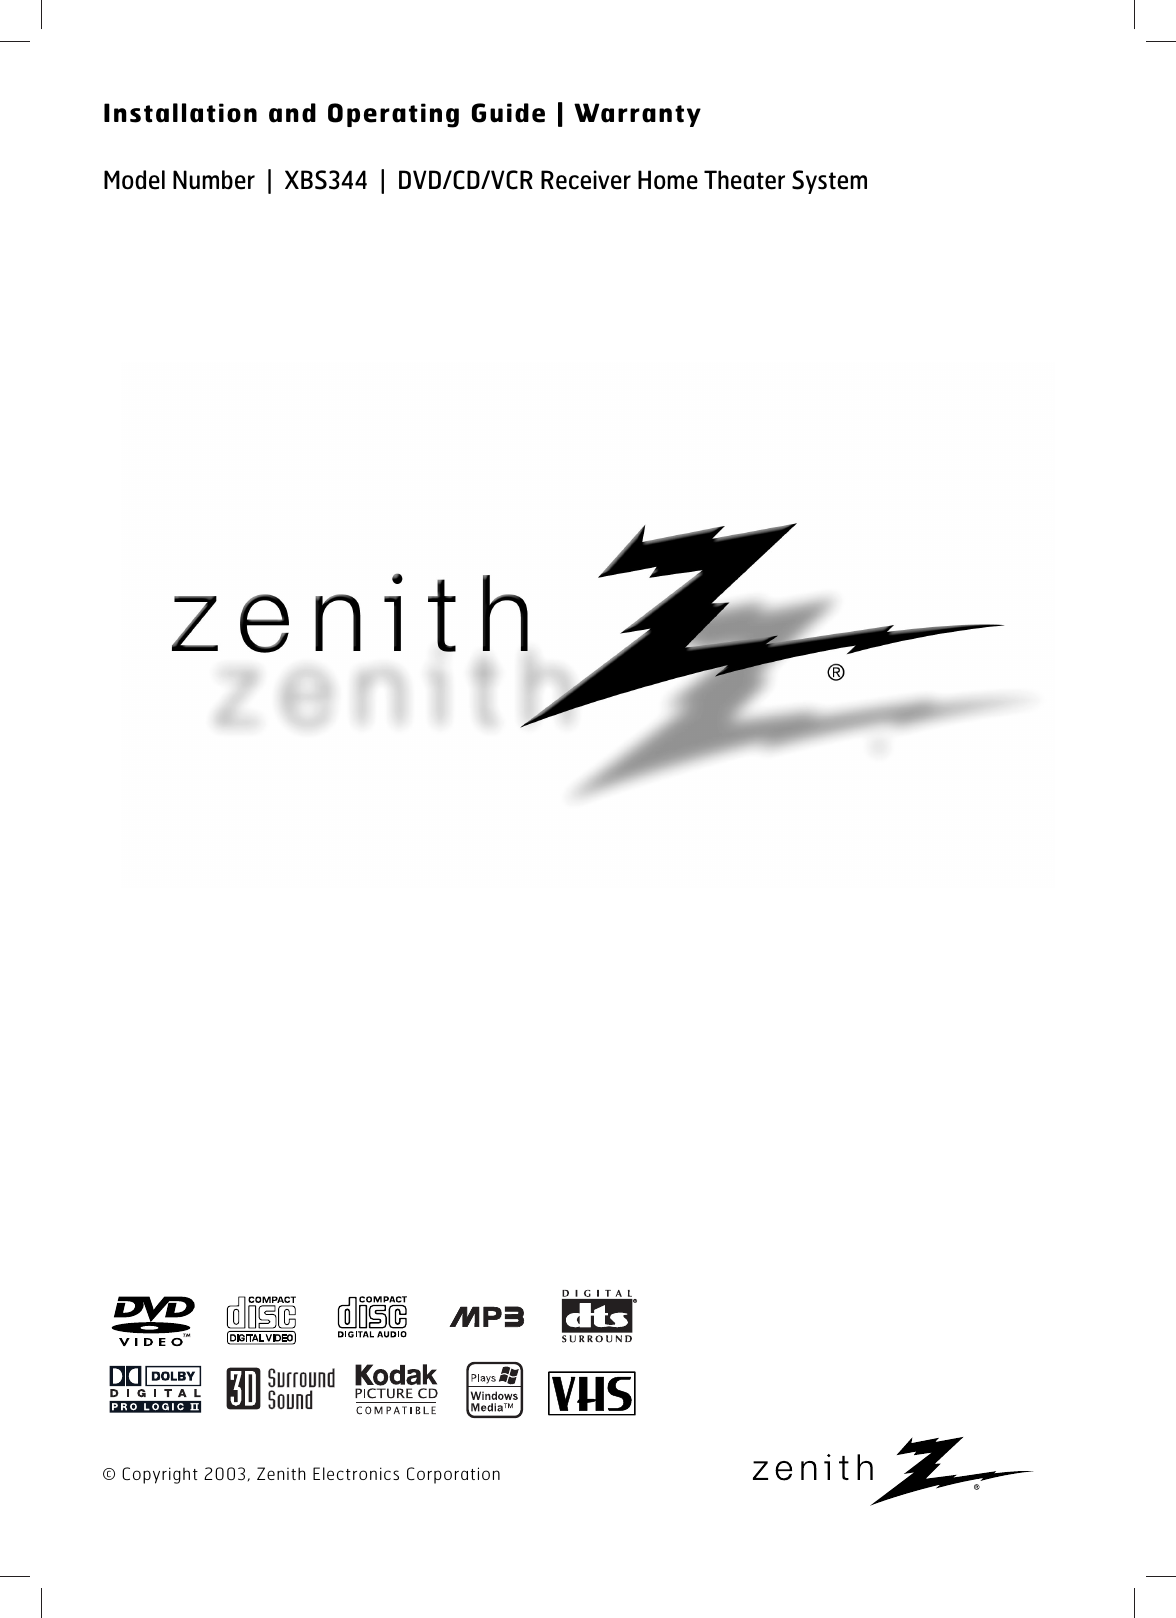 © Copyright 2003, Zenith Electronics CorporationInstallation and Operating Guide | WarrantyModel Number  |  XBS344  |  DVD/CD/VCR Receiver Home Theater System